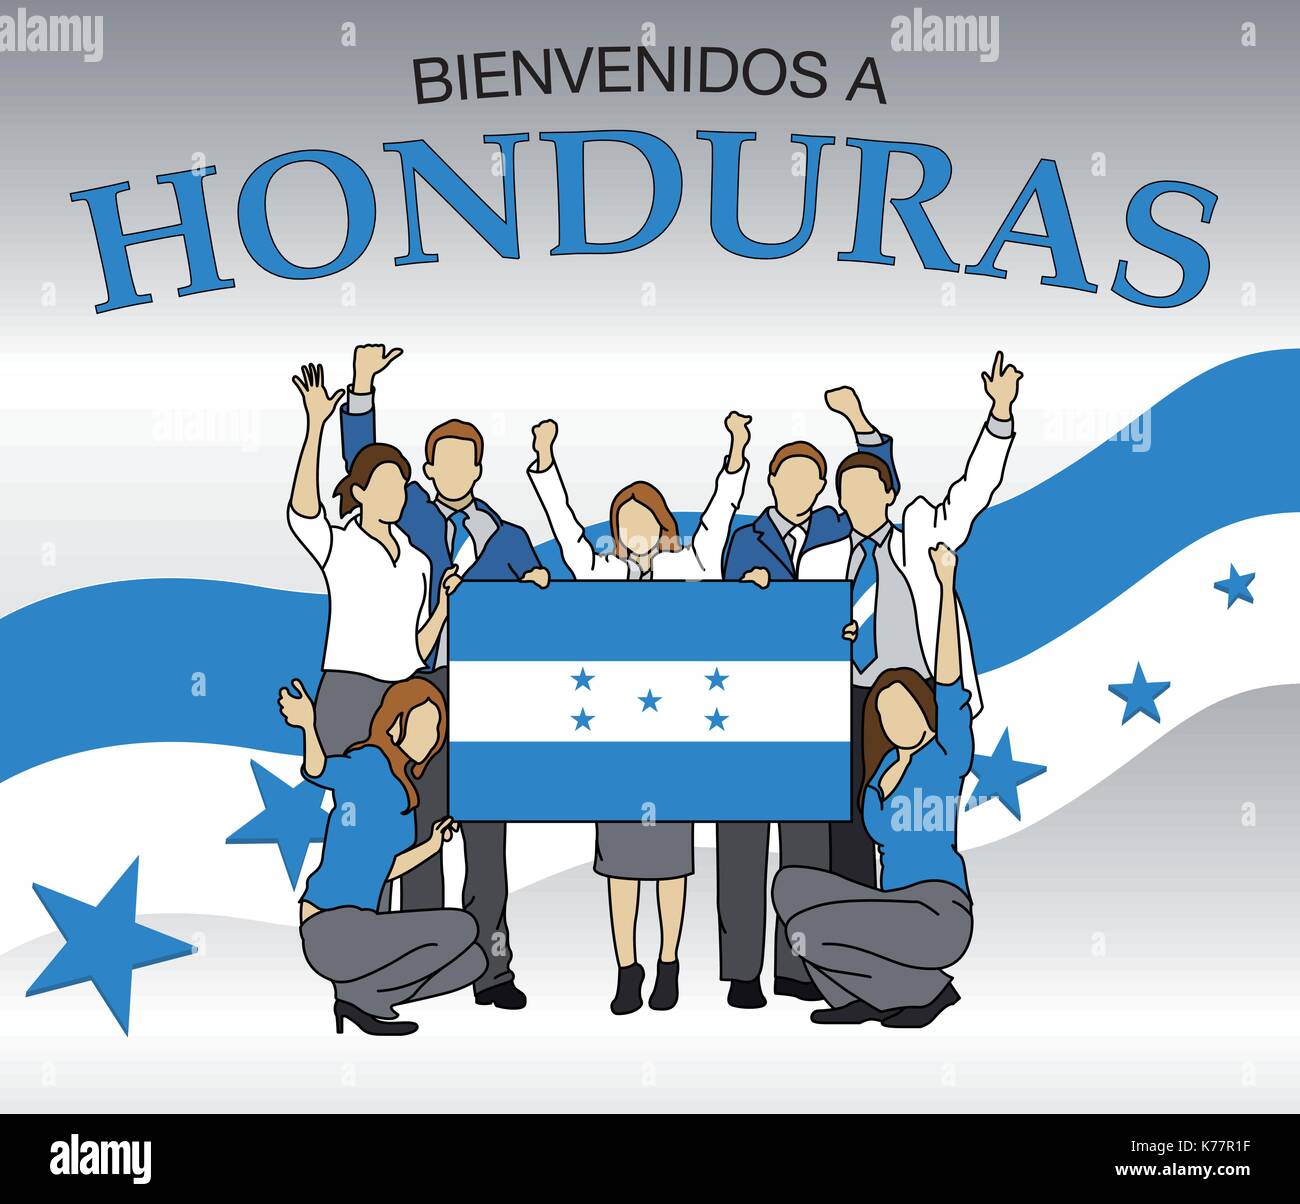 Welcome to Honduras in Spanish language- Group of people dressed in the colors of the Honduras flag, waving with hands and holding the flag - Vector Stock Vector